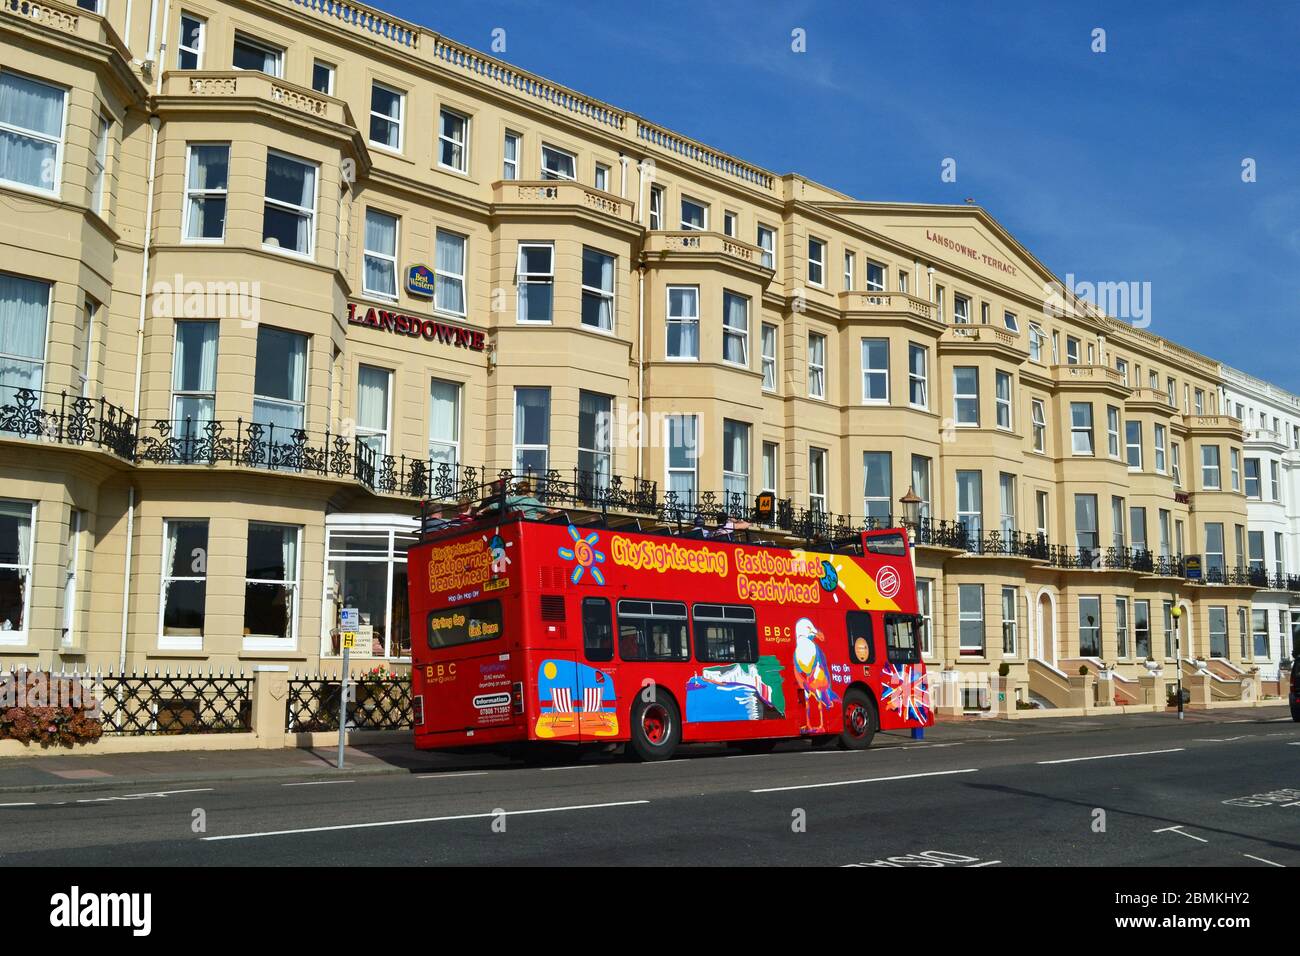 Eastbourne City Sightseeing Bus outside the Lansdowne Hotel, Eastbourne Seafront, East Sussex, UK Stock Photo